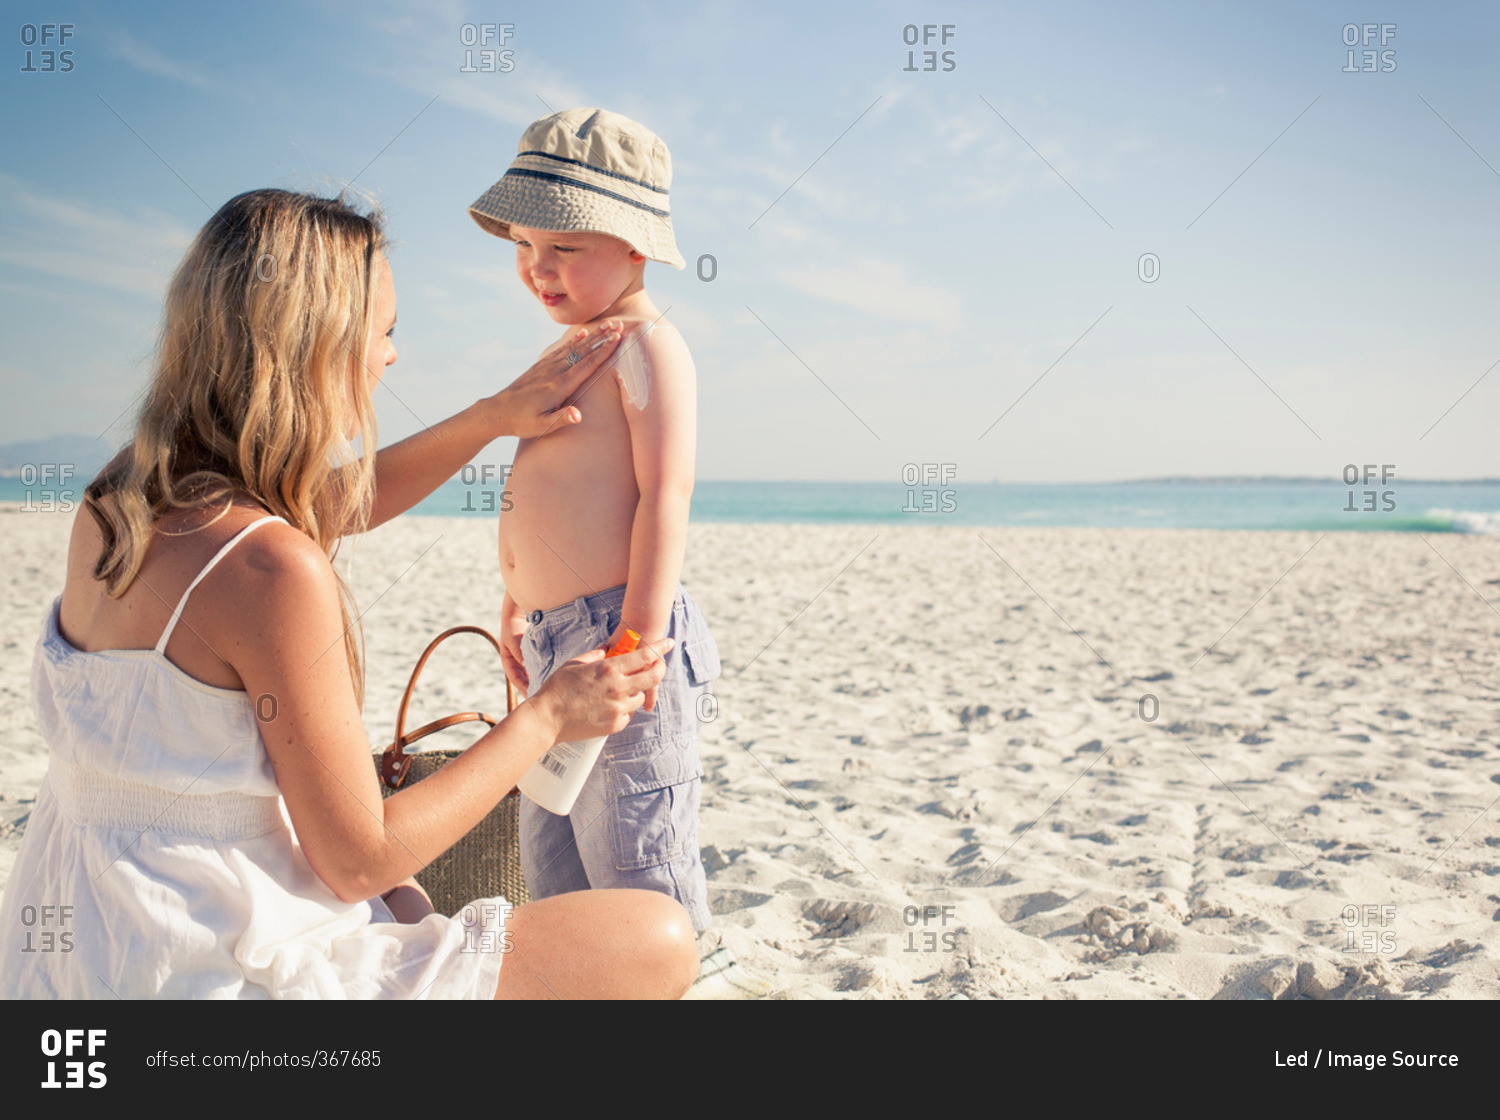 Mid adult mother applying sun lotion to young son on beach, Cape Town, Western Cape, South Africa